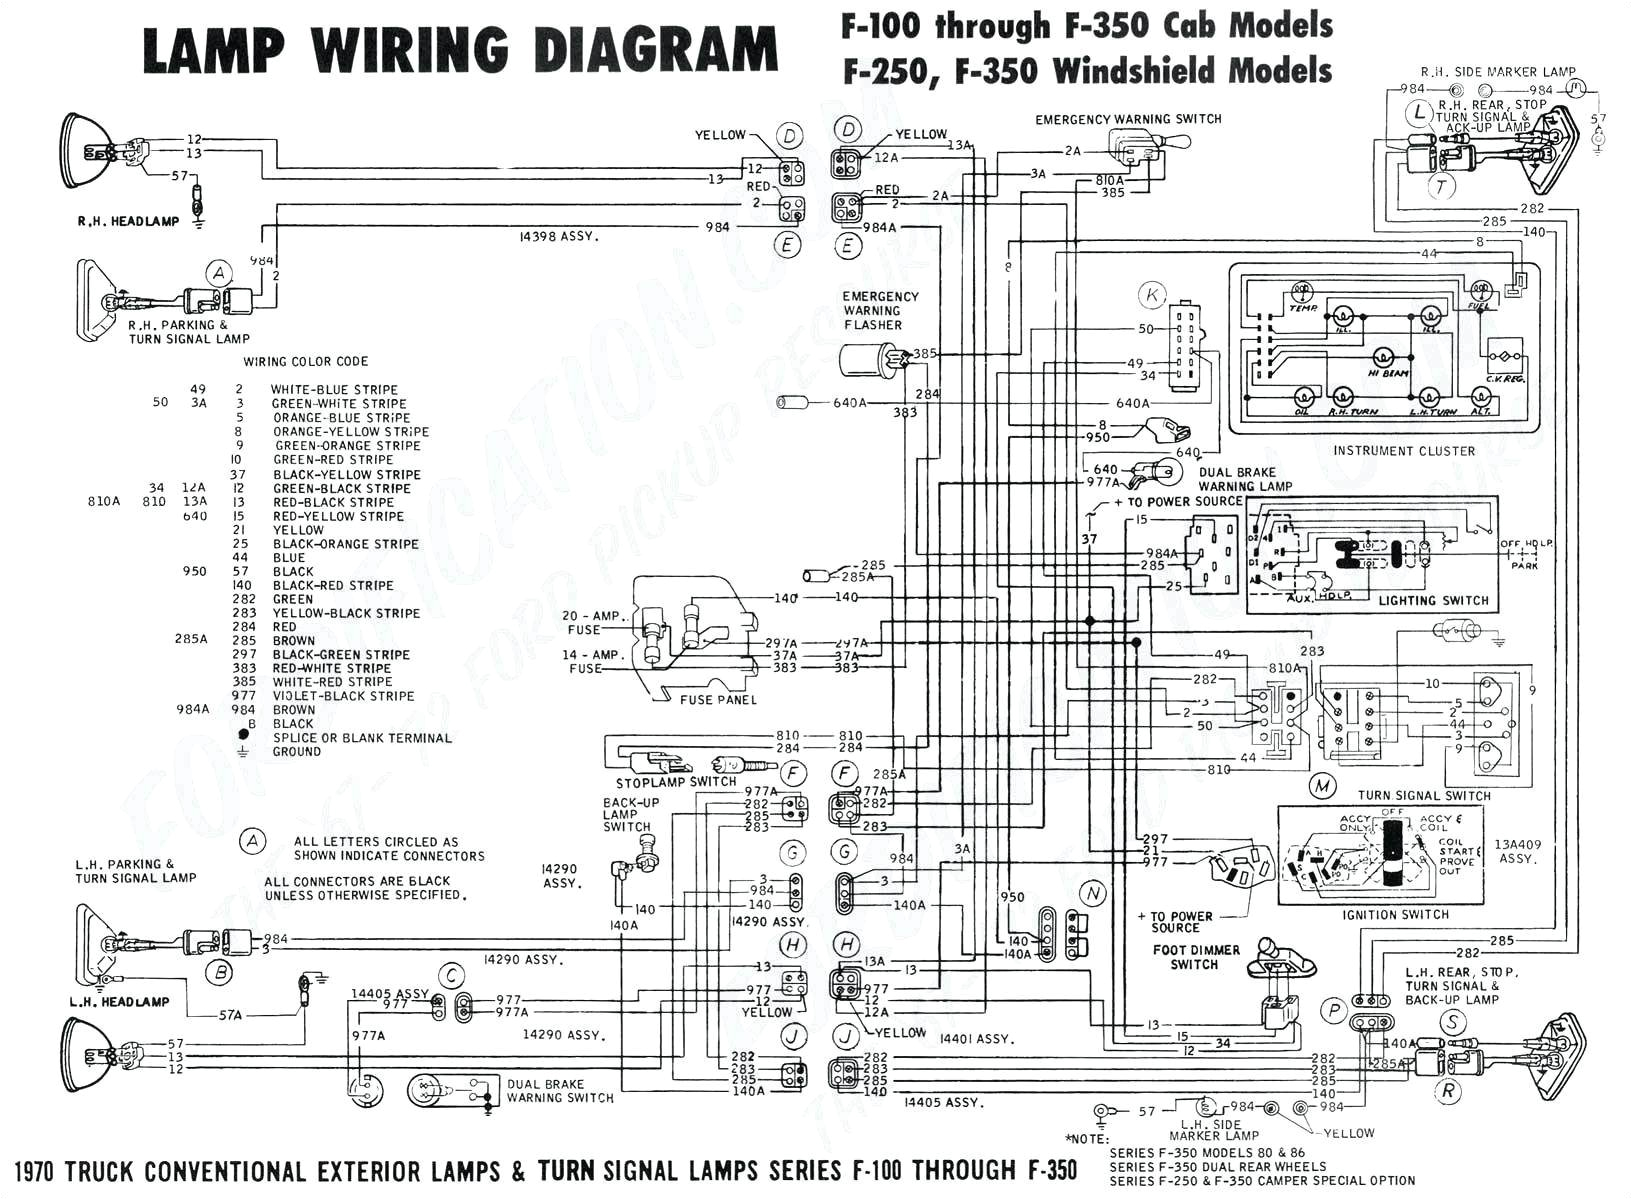 posted in automotive wiring ford tagged headlamp circuit wiring in automotive wiring dodge tagged dodge electrical schematic diagram